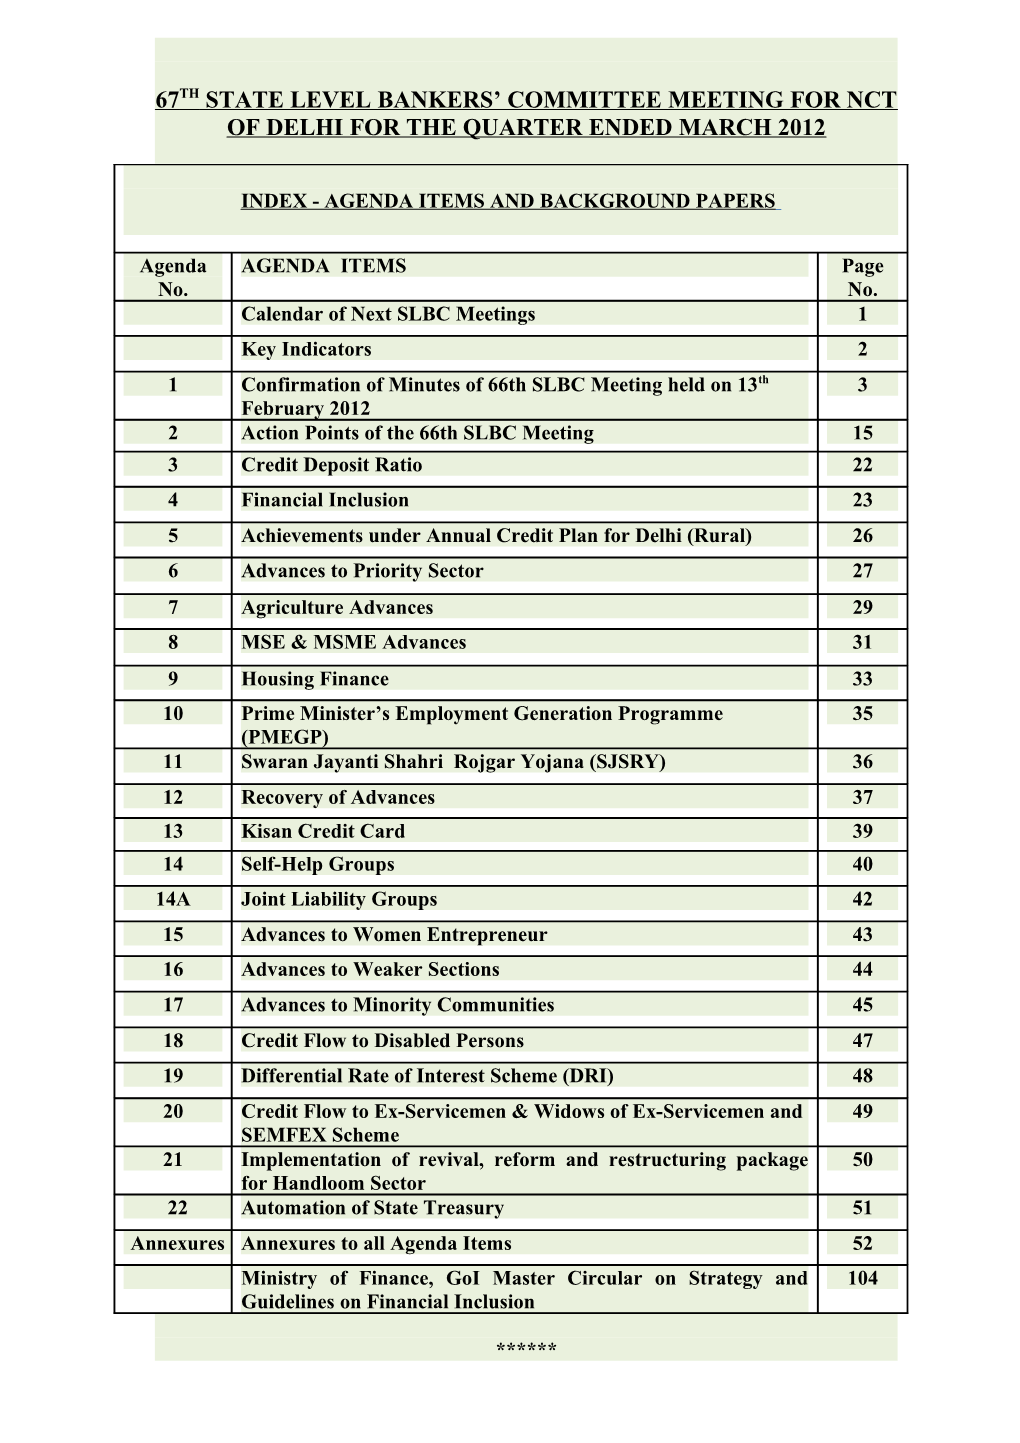 Index - Agenda Items and Background Papers